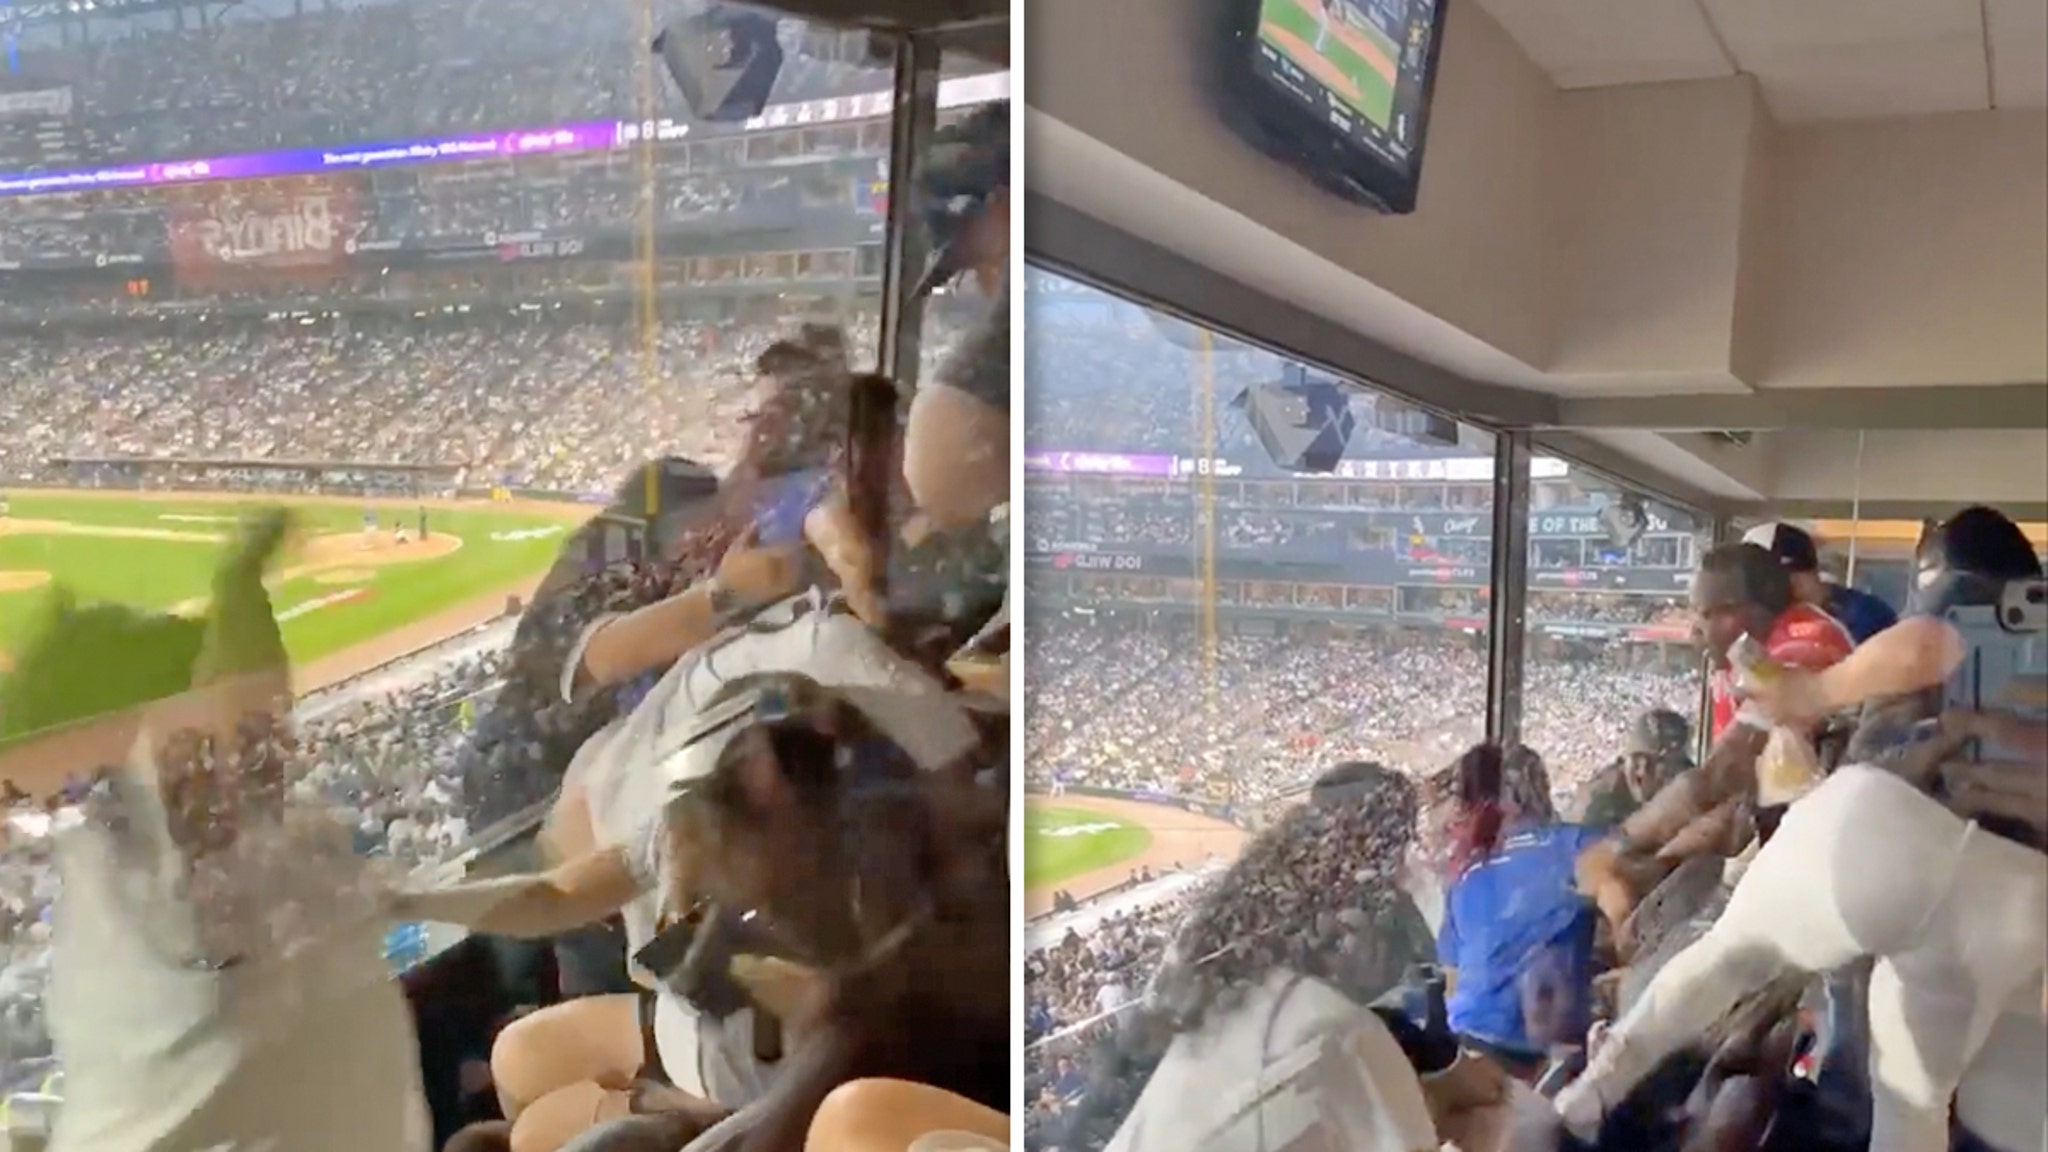 Cubs, White Sox Fans Get In Wild Brawl In Suite At Game